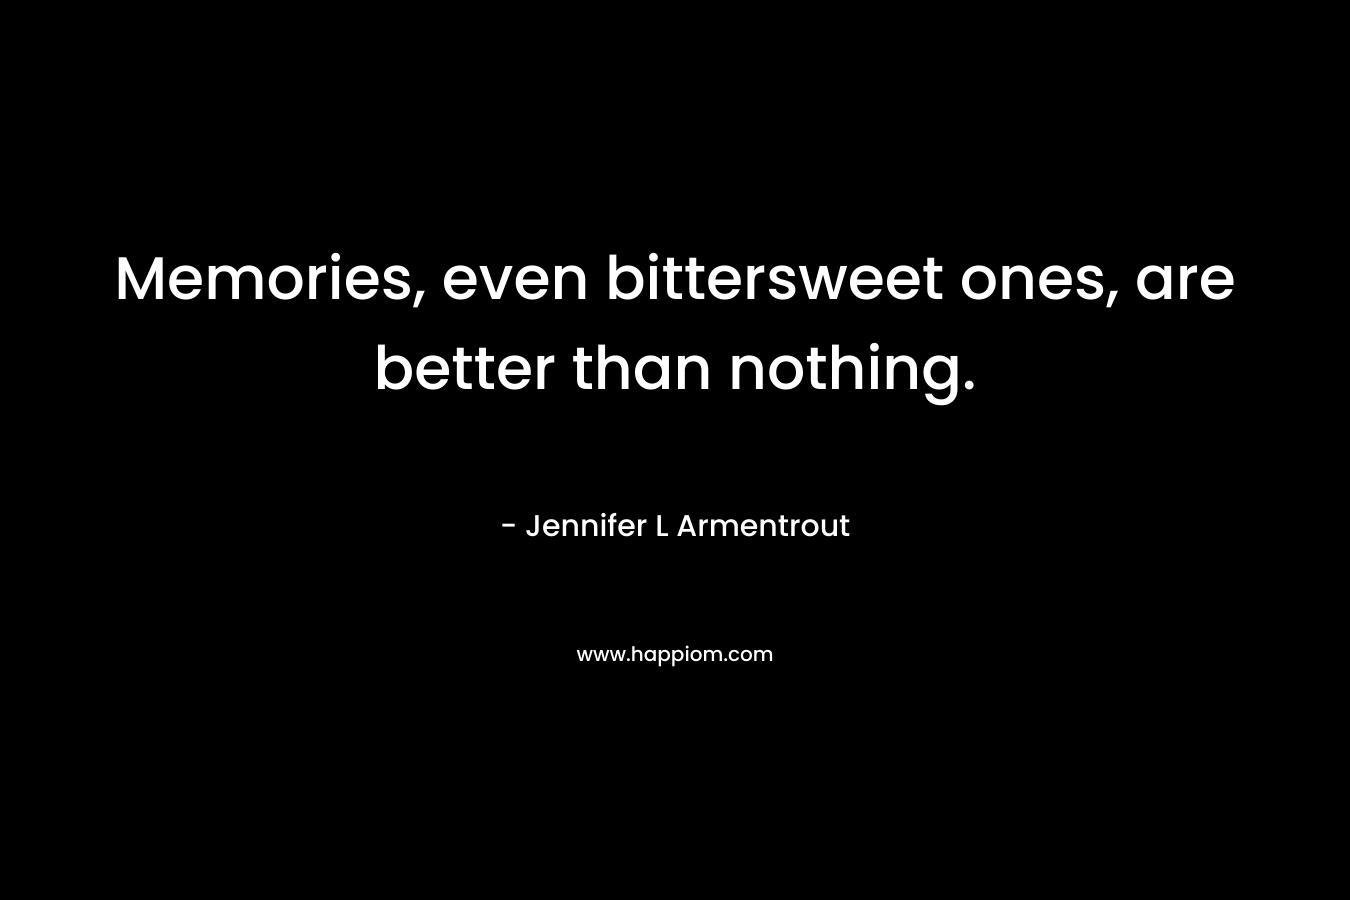 Memories, even bittersweet ones, are better than nothing. – Jennifer L Armentrout